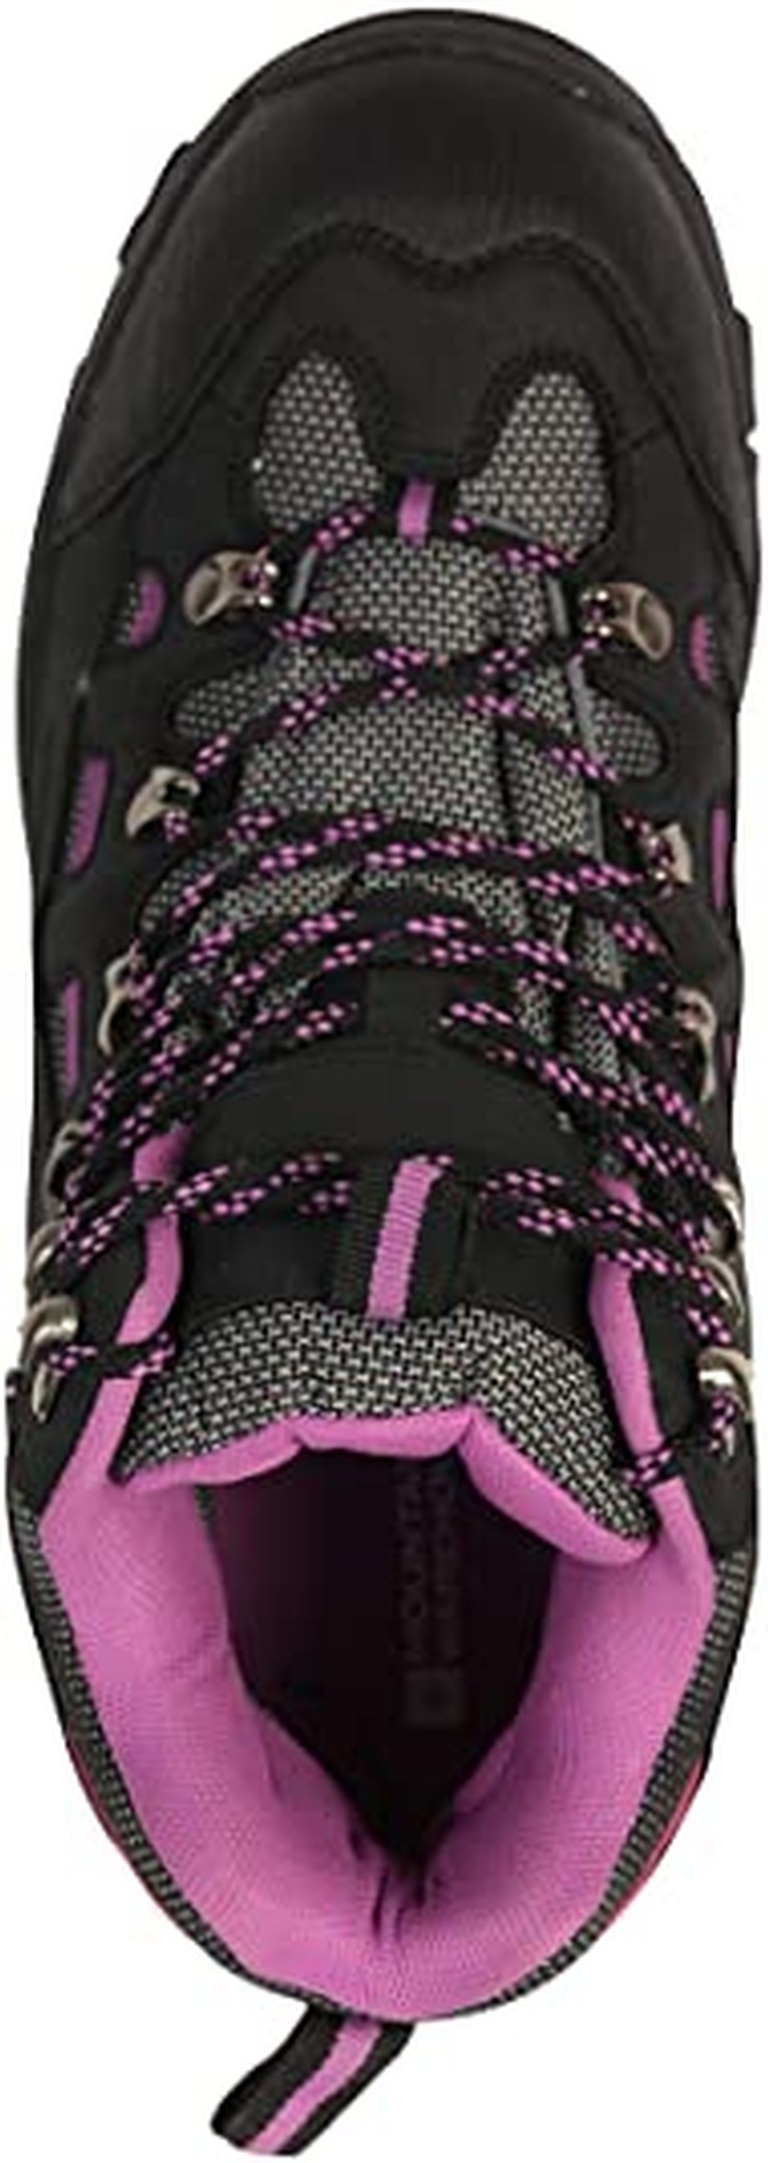 Mountain Warehouse Adventurer Womens Waterproof Hiking Boots at Sopro Market - Online Clothing Store Canada